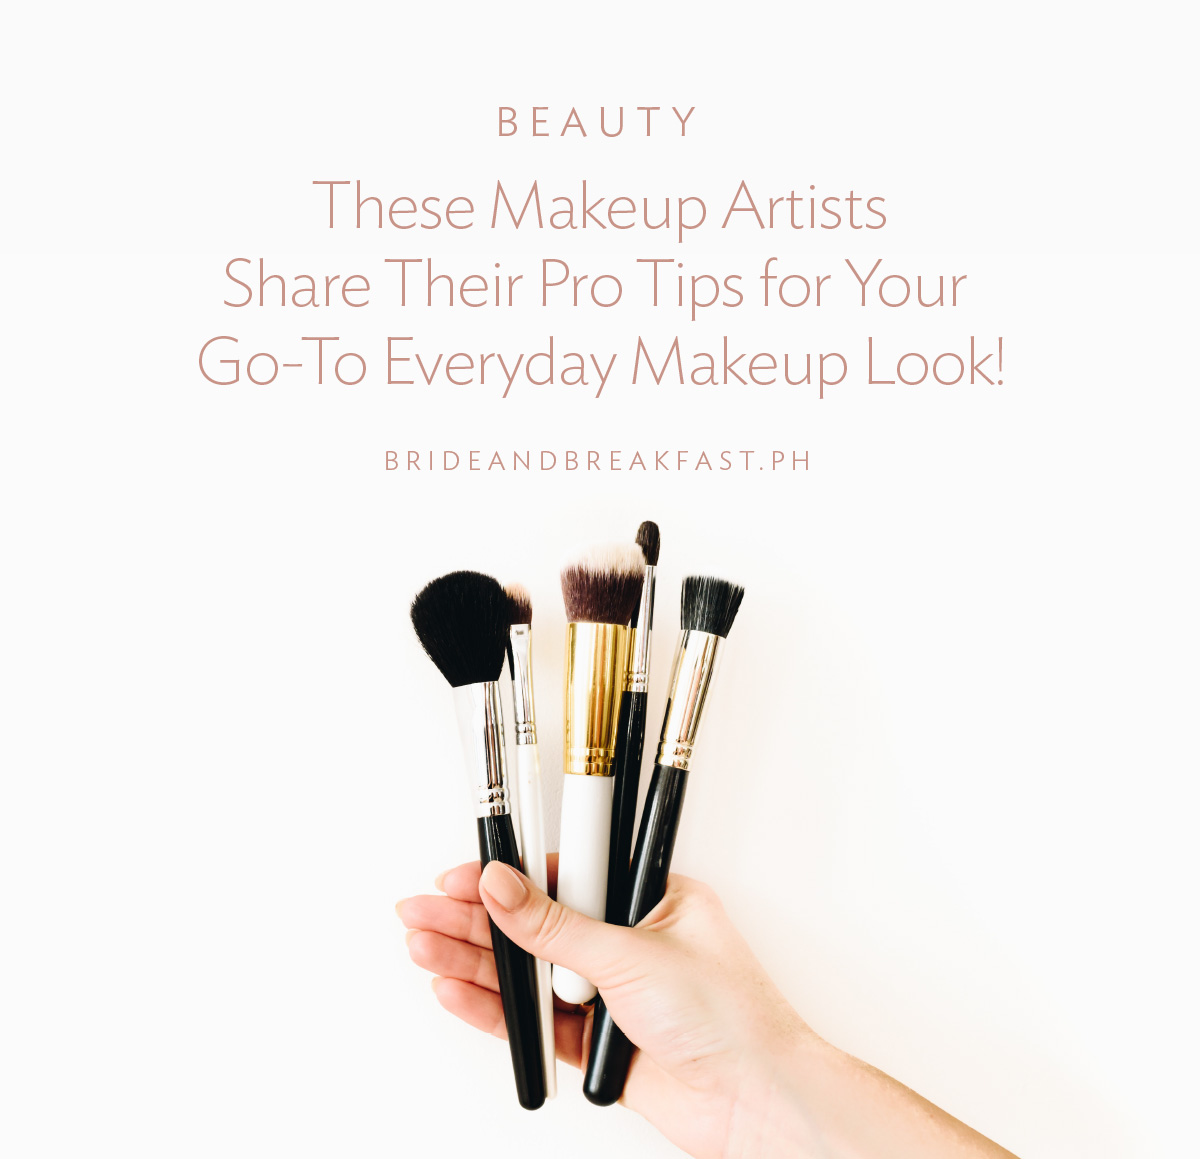 These Makeup Artists Share Their Pro Tips for Your Go-To Everyday Makeup Look!